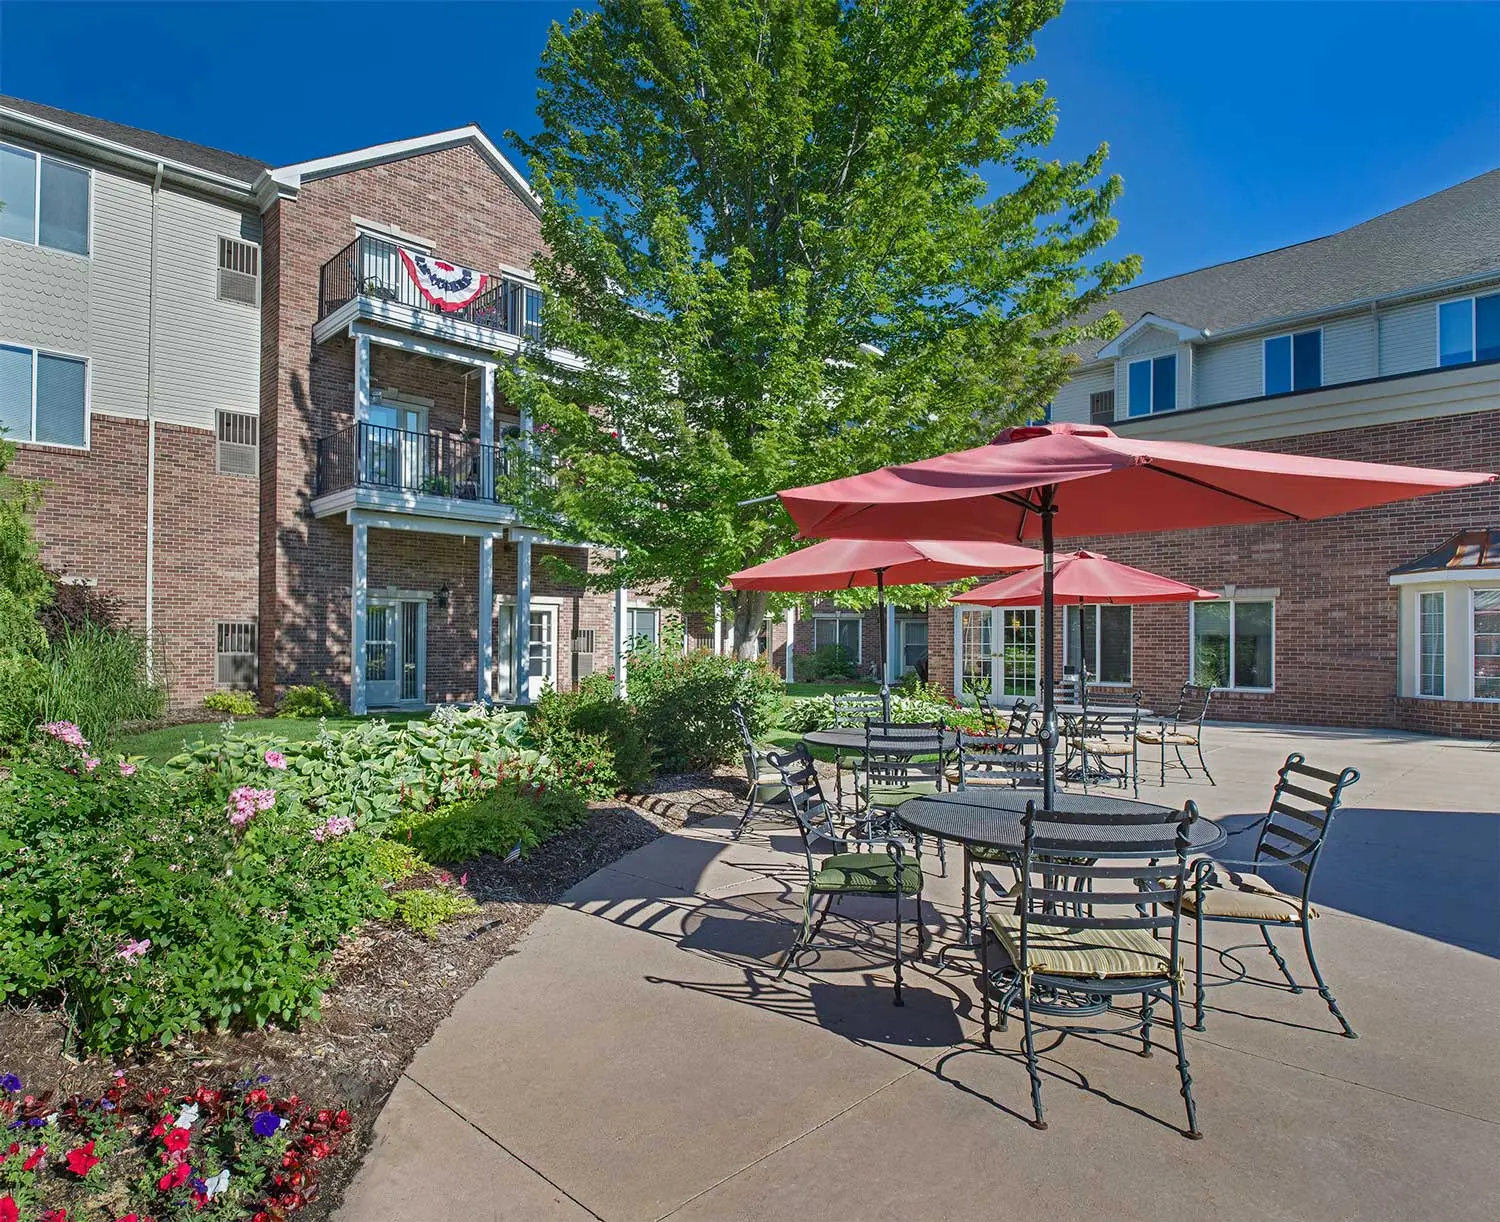 Patio furniture and garden on a clear sunny day at American House senior housing in North Sterling Heights, MI